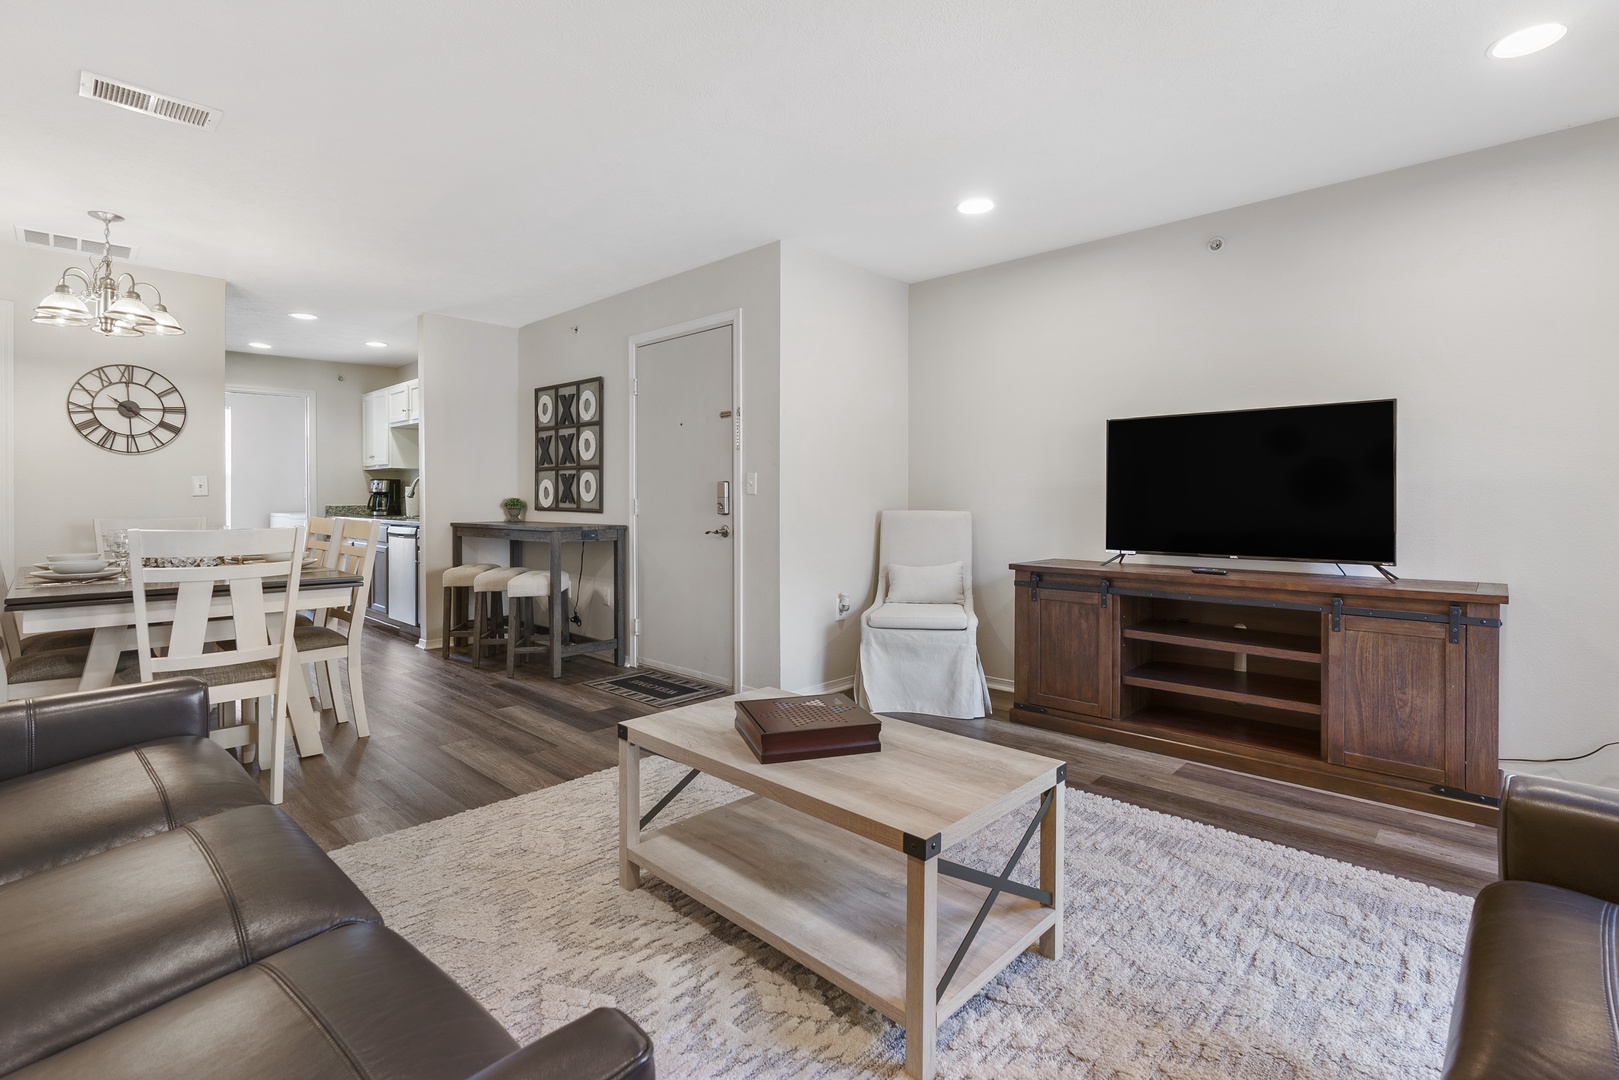 Open living space with ample seating, Smart TV, and balcony access